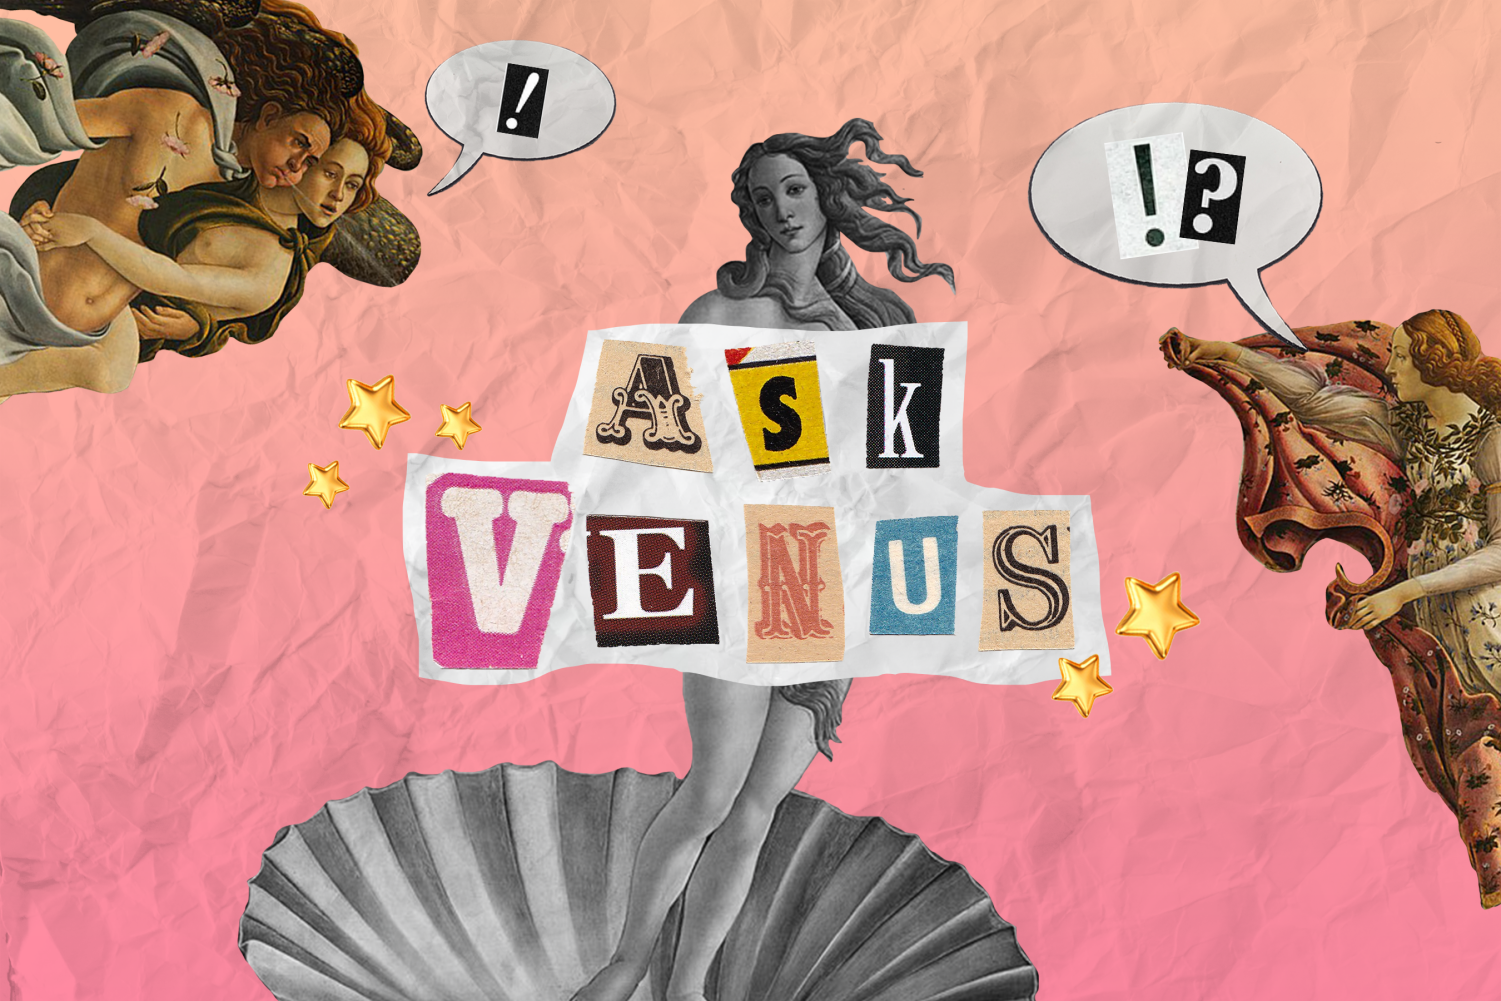 Greek+art+of+Venus+with+assorted+lettering+that+says+%E2%80%9CAsk+Venus.%E2%80%9D+Pink+background.